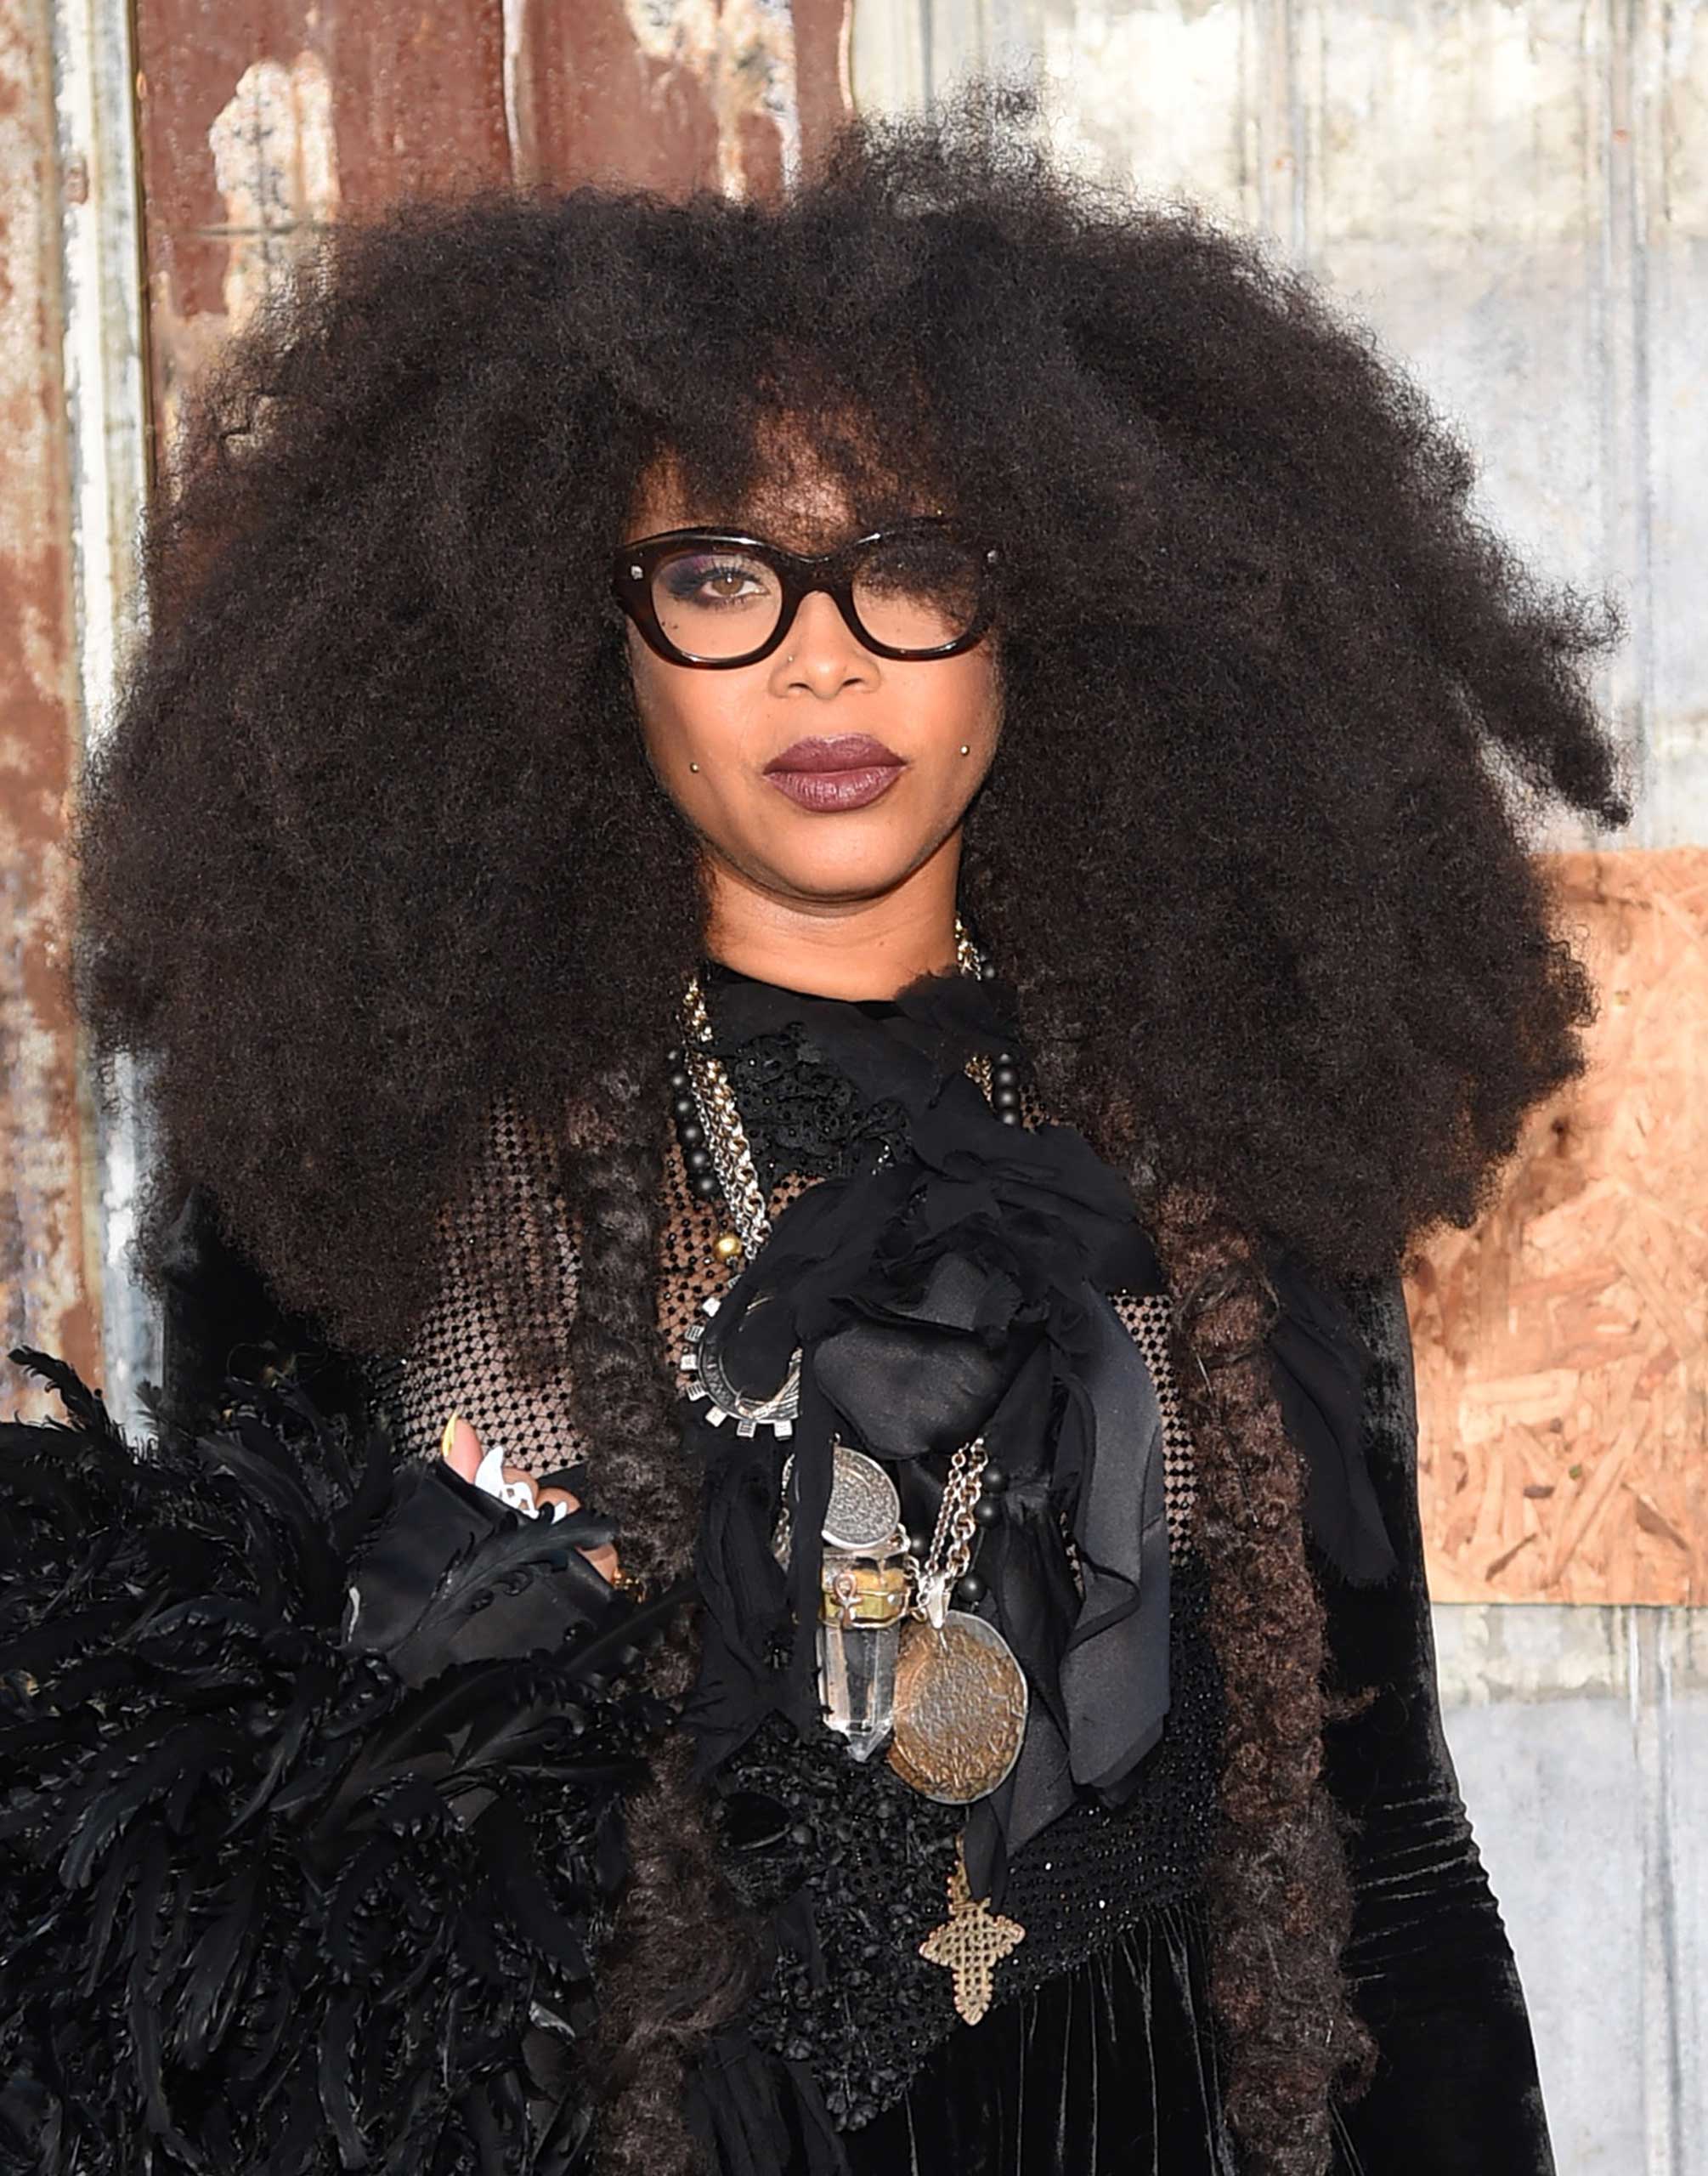 Singer-songwriter Erykah Badu attends the Givenchy fashion show during Spring 2016 New York Fashion Week at Pier 26 at Hudson River Park in New York City on Sept. 11, 2015. (Michael Loccisano—Getty Images)